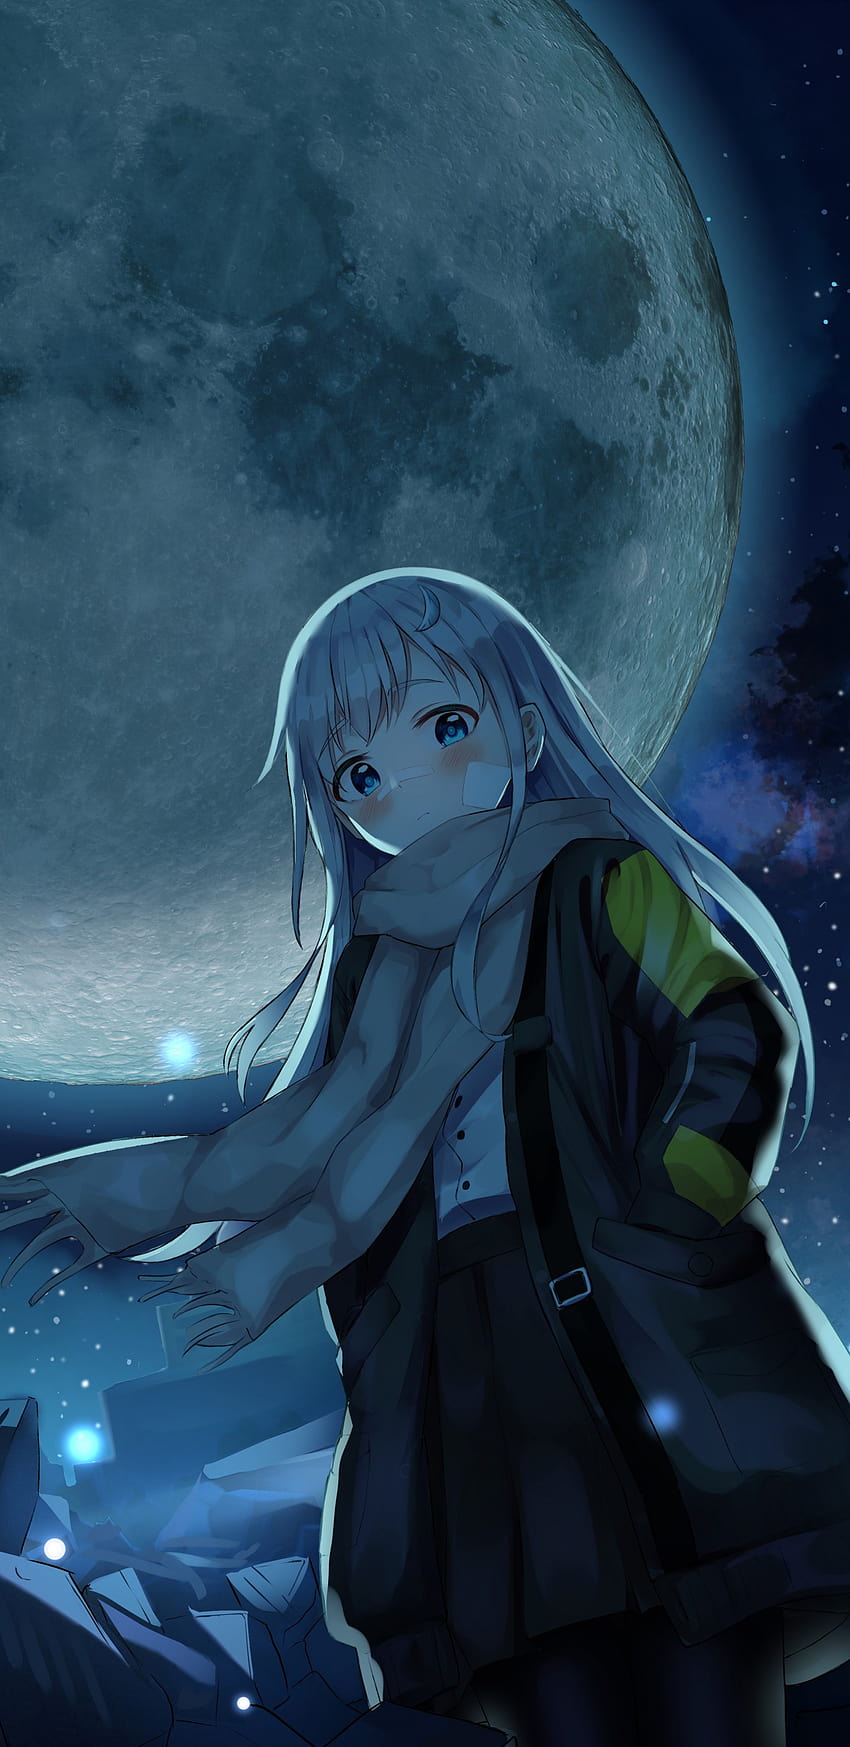 1440x2960 Anime Night, Giant Moon, Starry Sky, Anime Girl, Winter for Samsung Galaxy S9, Note 9, S8, S8+, Google Pixel 3 XL HD phone wallpaper